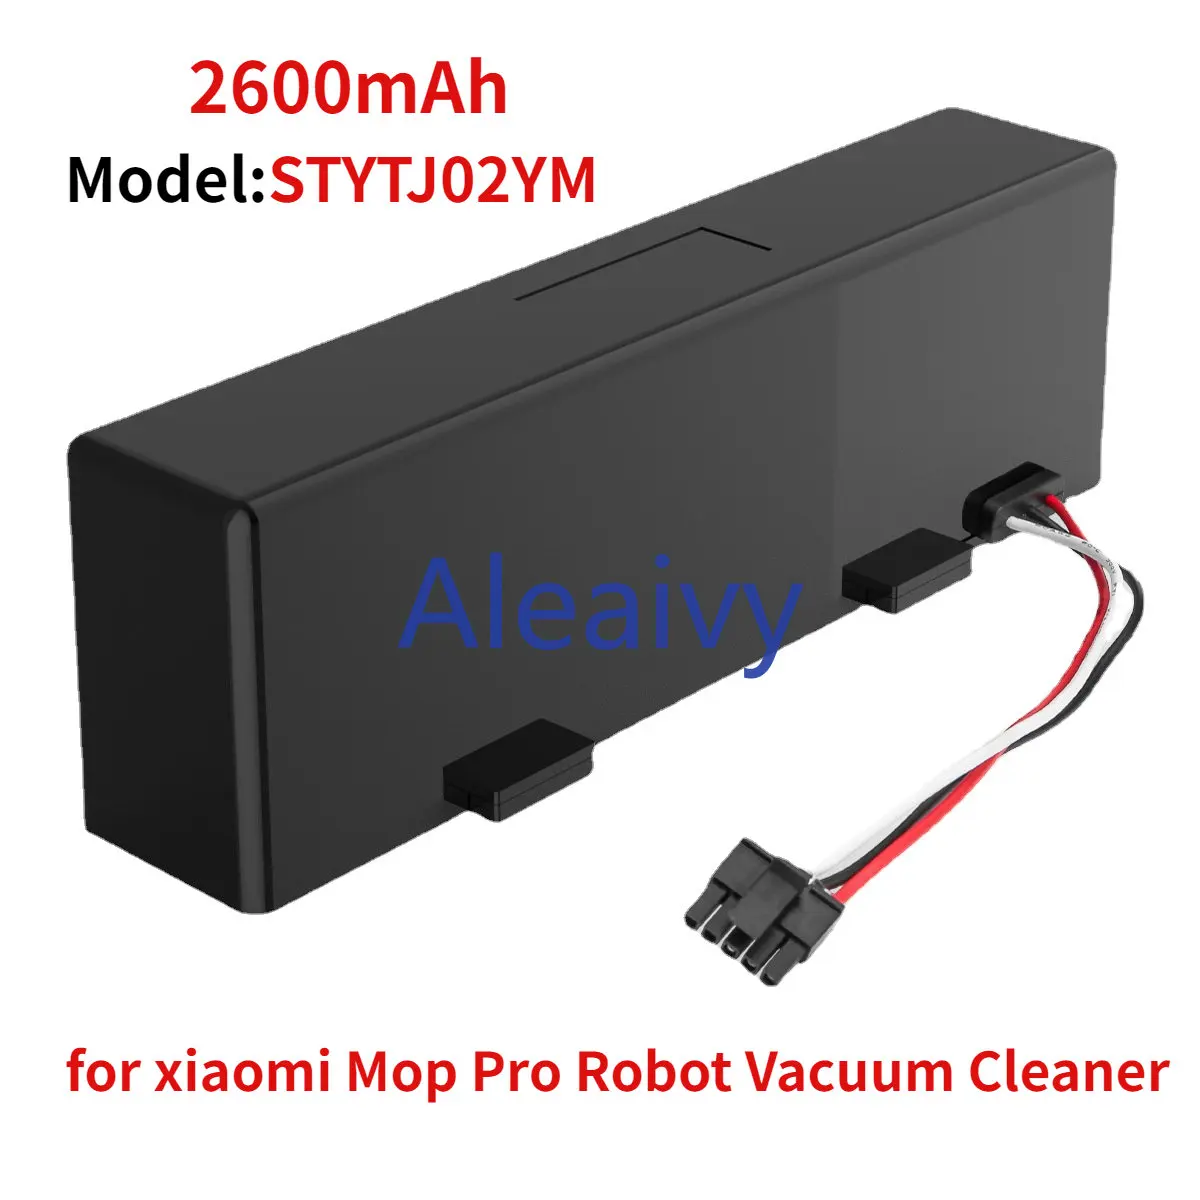 

Replacement Battery for Mijia Mop Pro Robot Vacuum Cleaner STYTJ02YM Accessory Accessories 14.8V 2600mAh 18650 Li-ion Battery